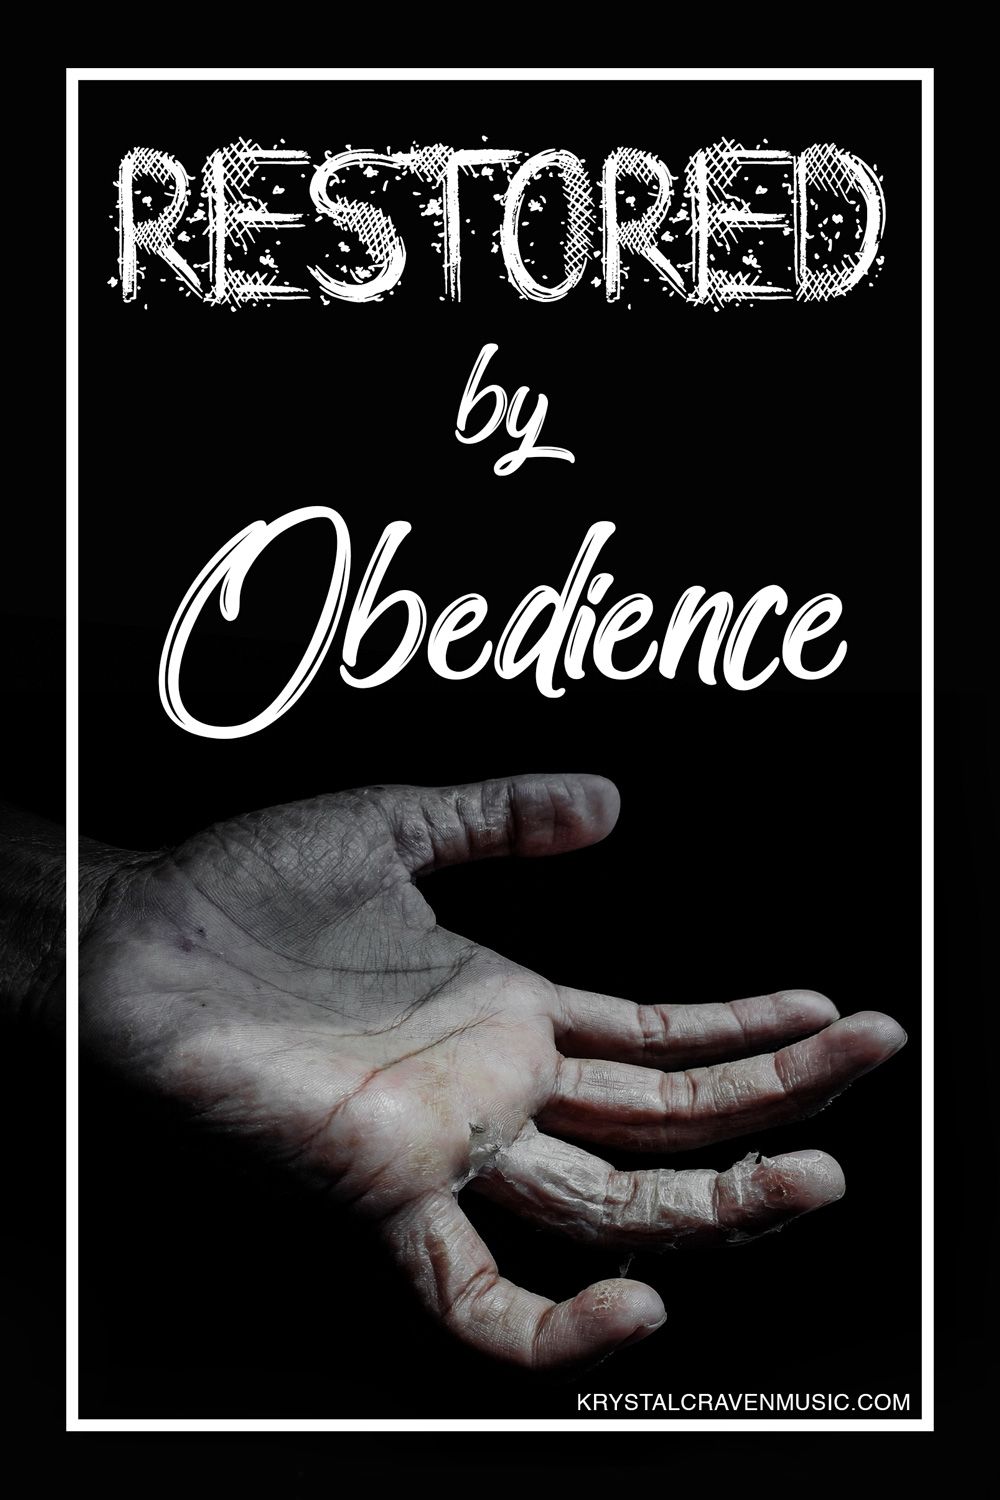 The devotional title text overlaying a withered hand on a black background.